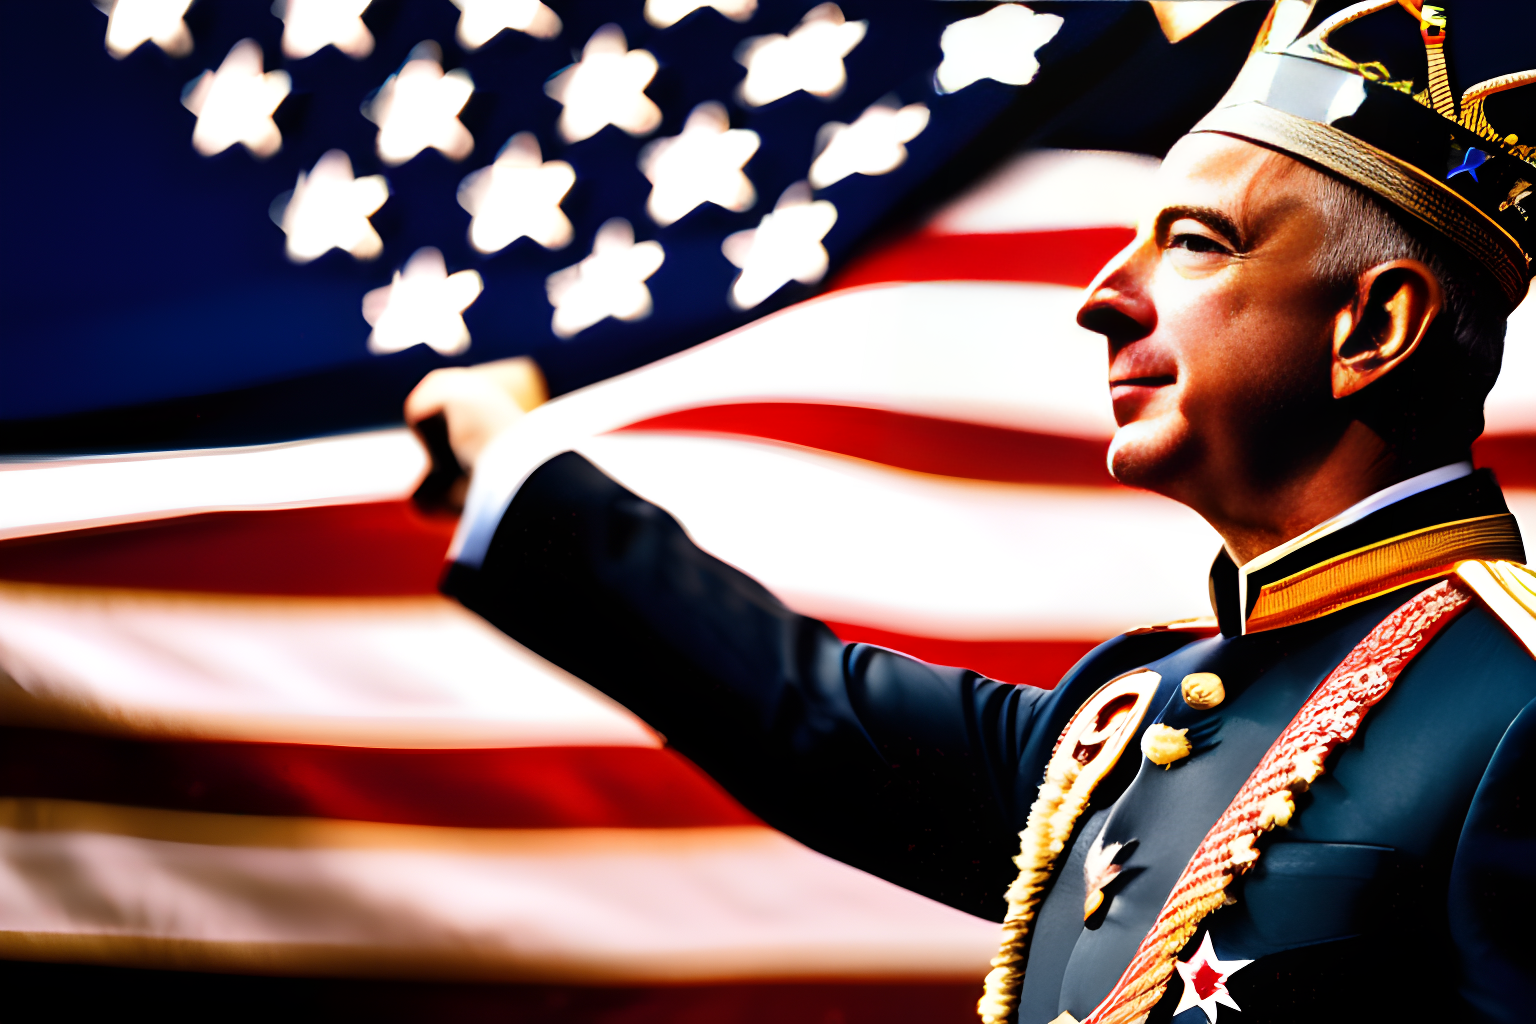 Breathtaking photograph of Jeff Bezos, wearing a crown, holding the U.S flag.